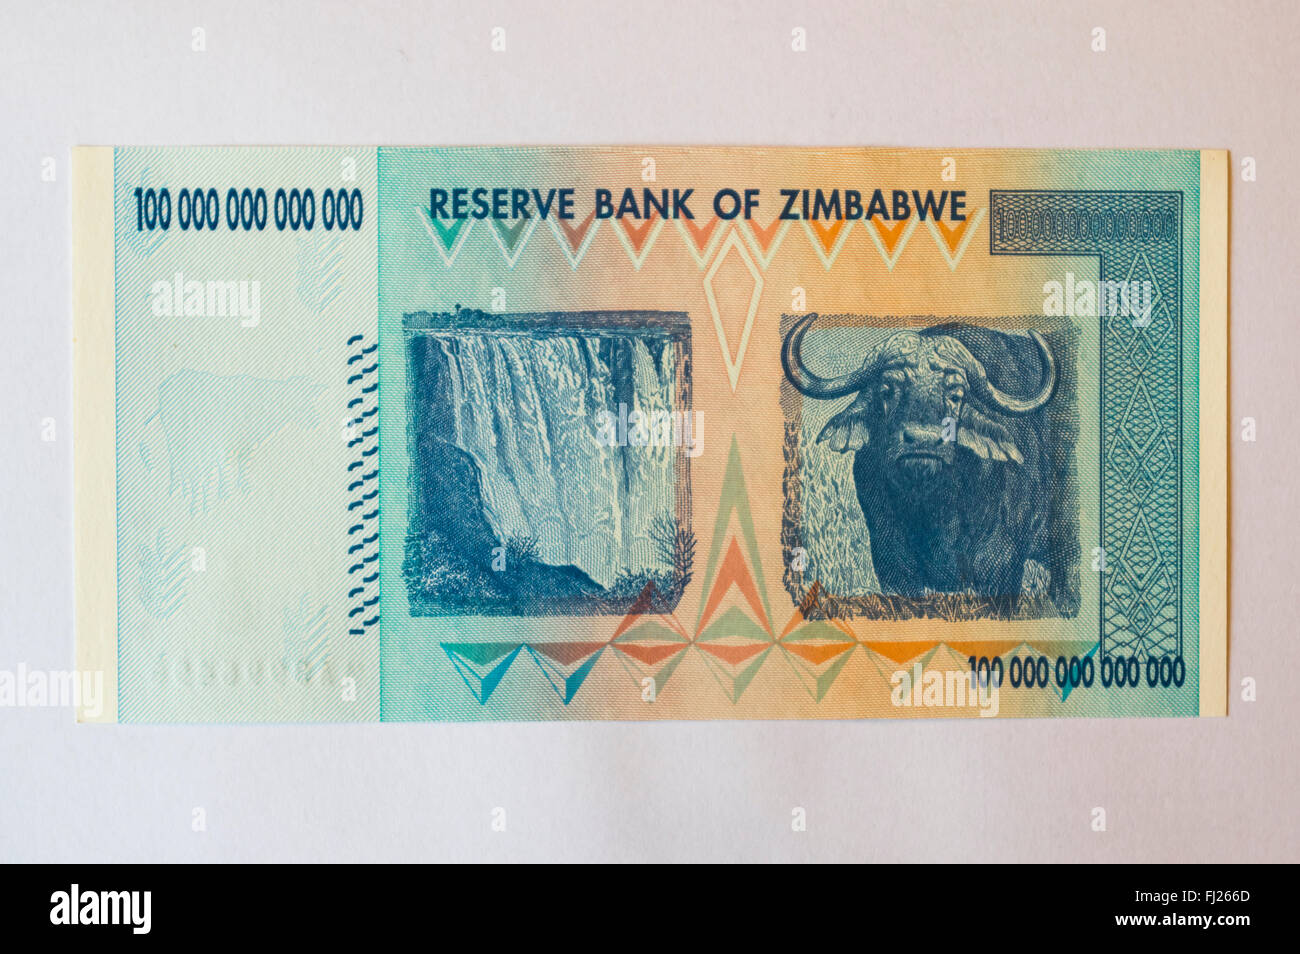 One hundred trillion dollars banknote issued in Zimbabwe in 2008, on the climax of the hyperinflation. White background. Stock Photo